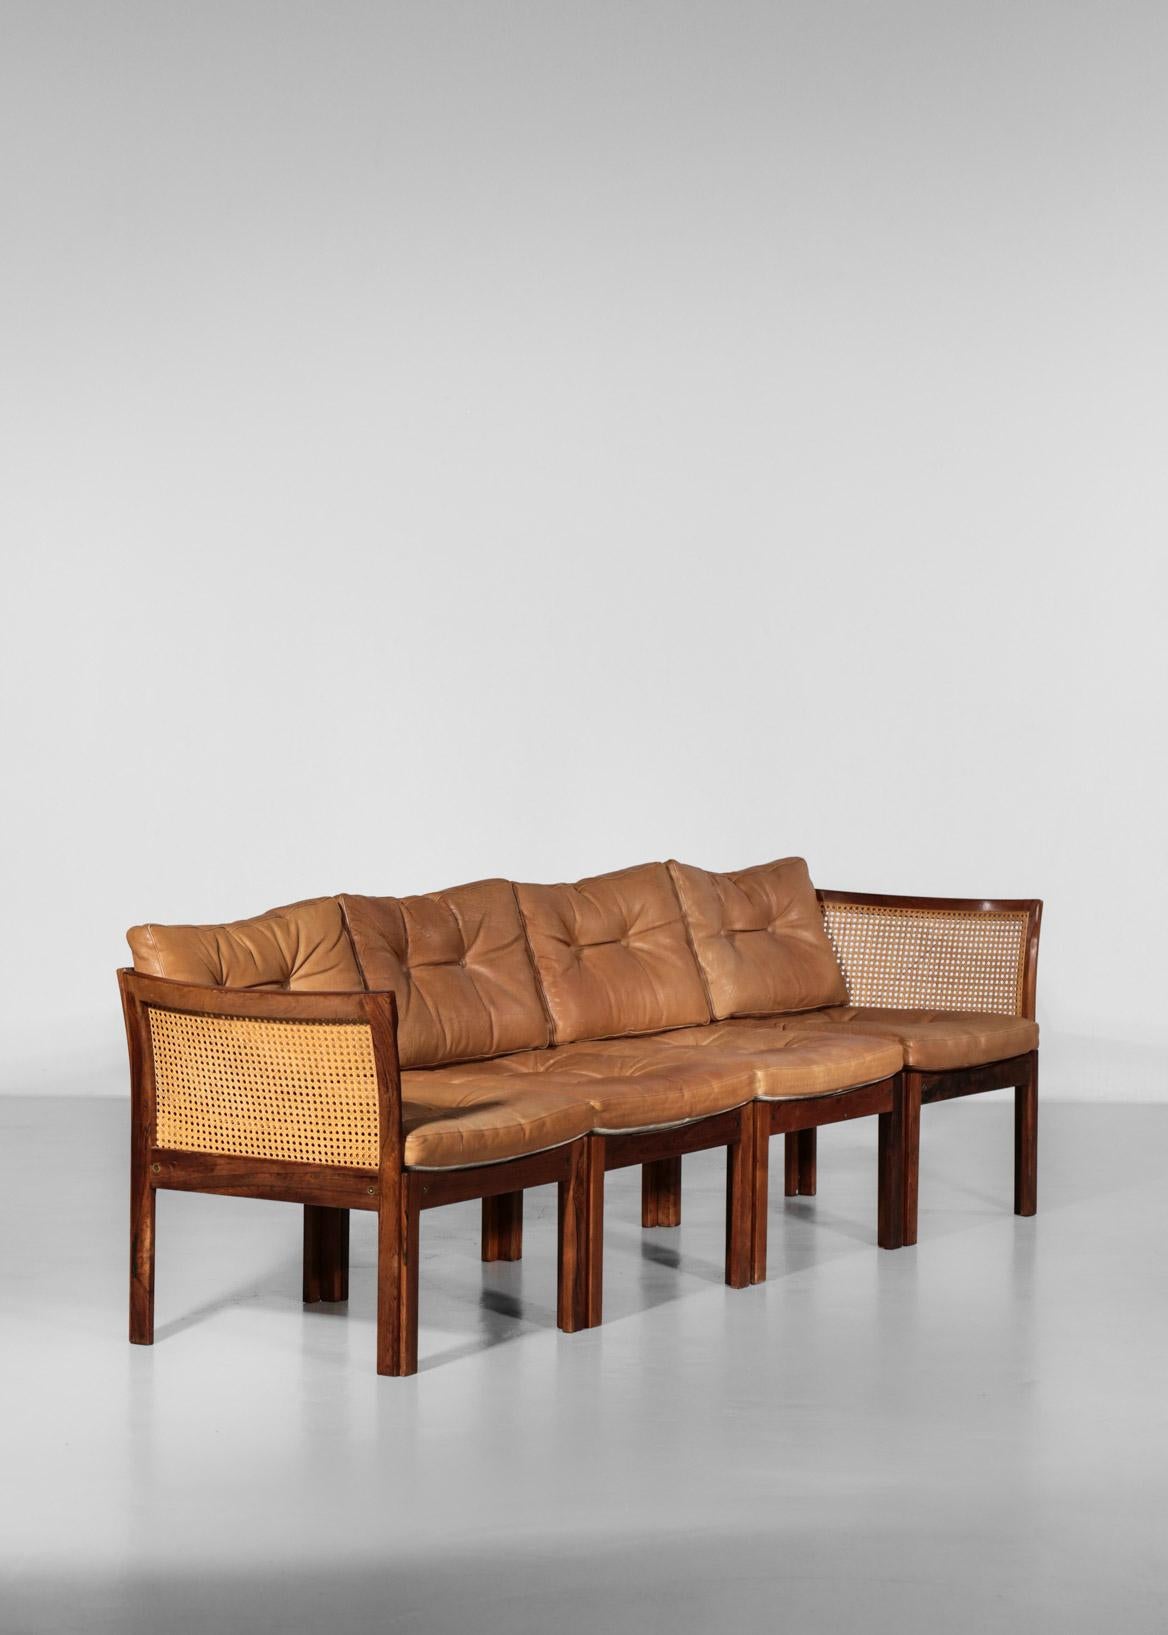 Illum Wikkelso Leather Sofa in Rosewood and Woven Rattan Cane For Sale 12